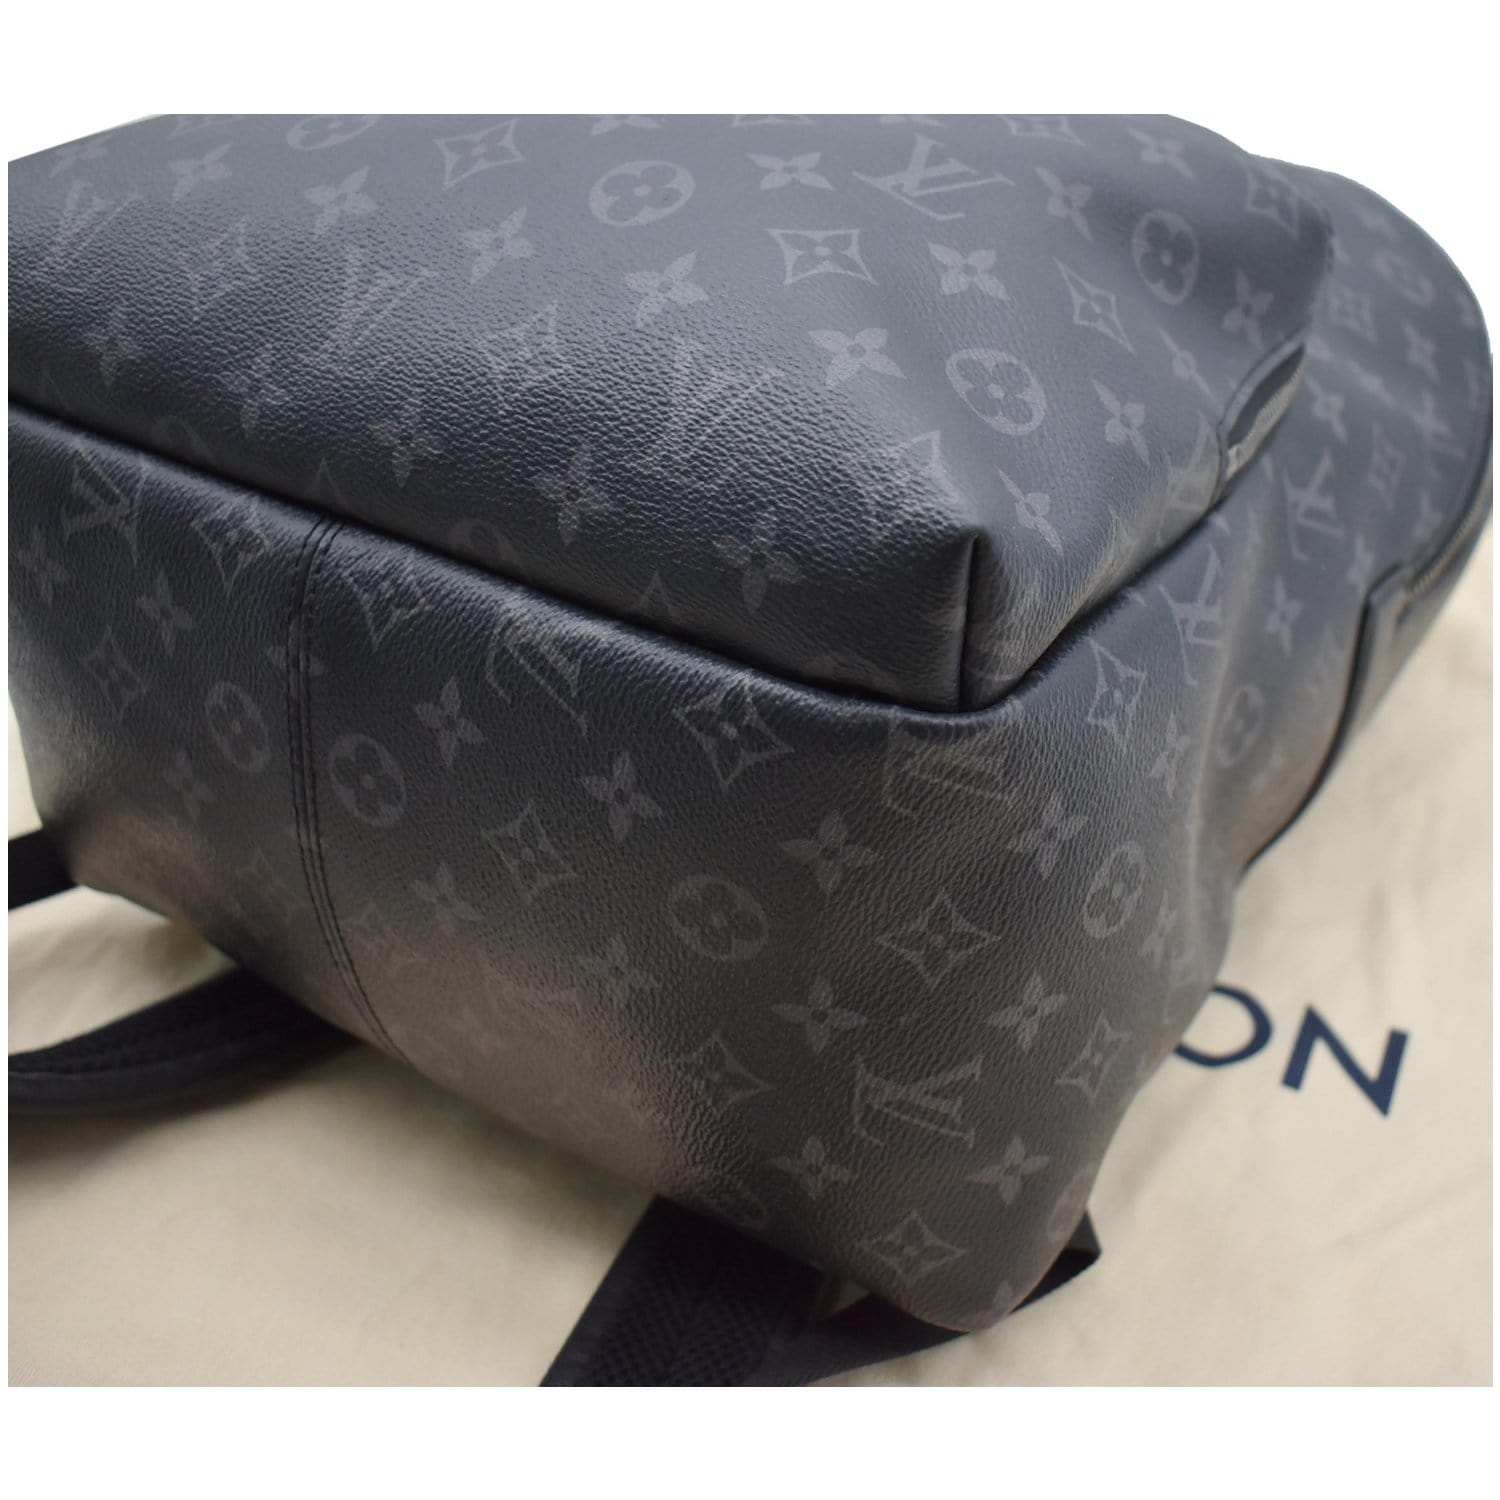 LOUIS VUITTON Discovery PM Monogram Eclipse Backpack Bag Black